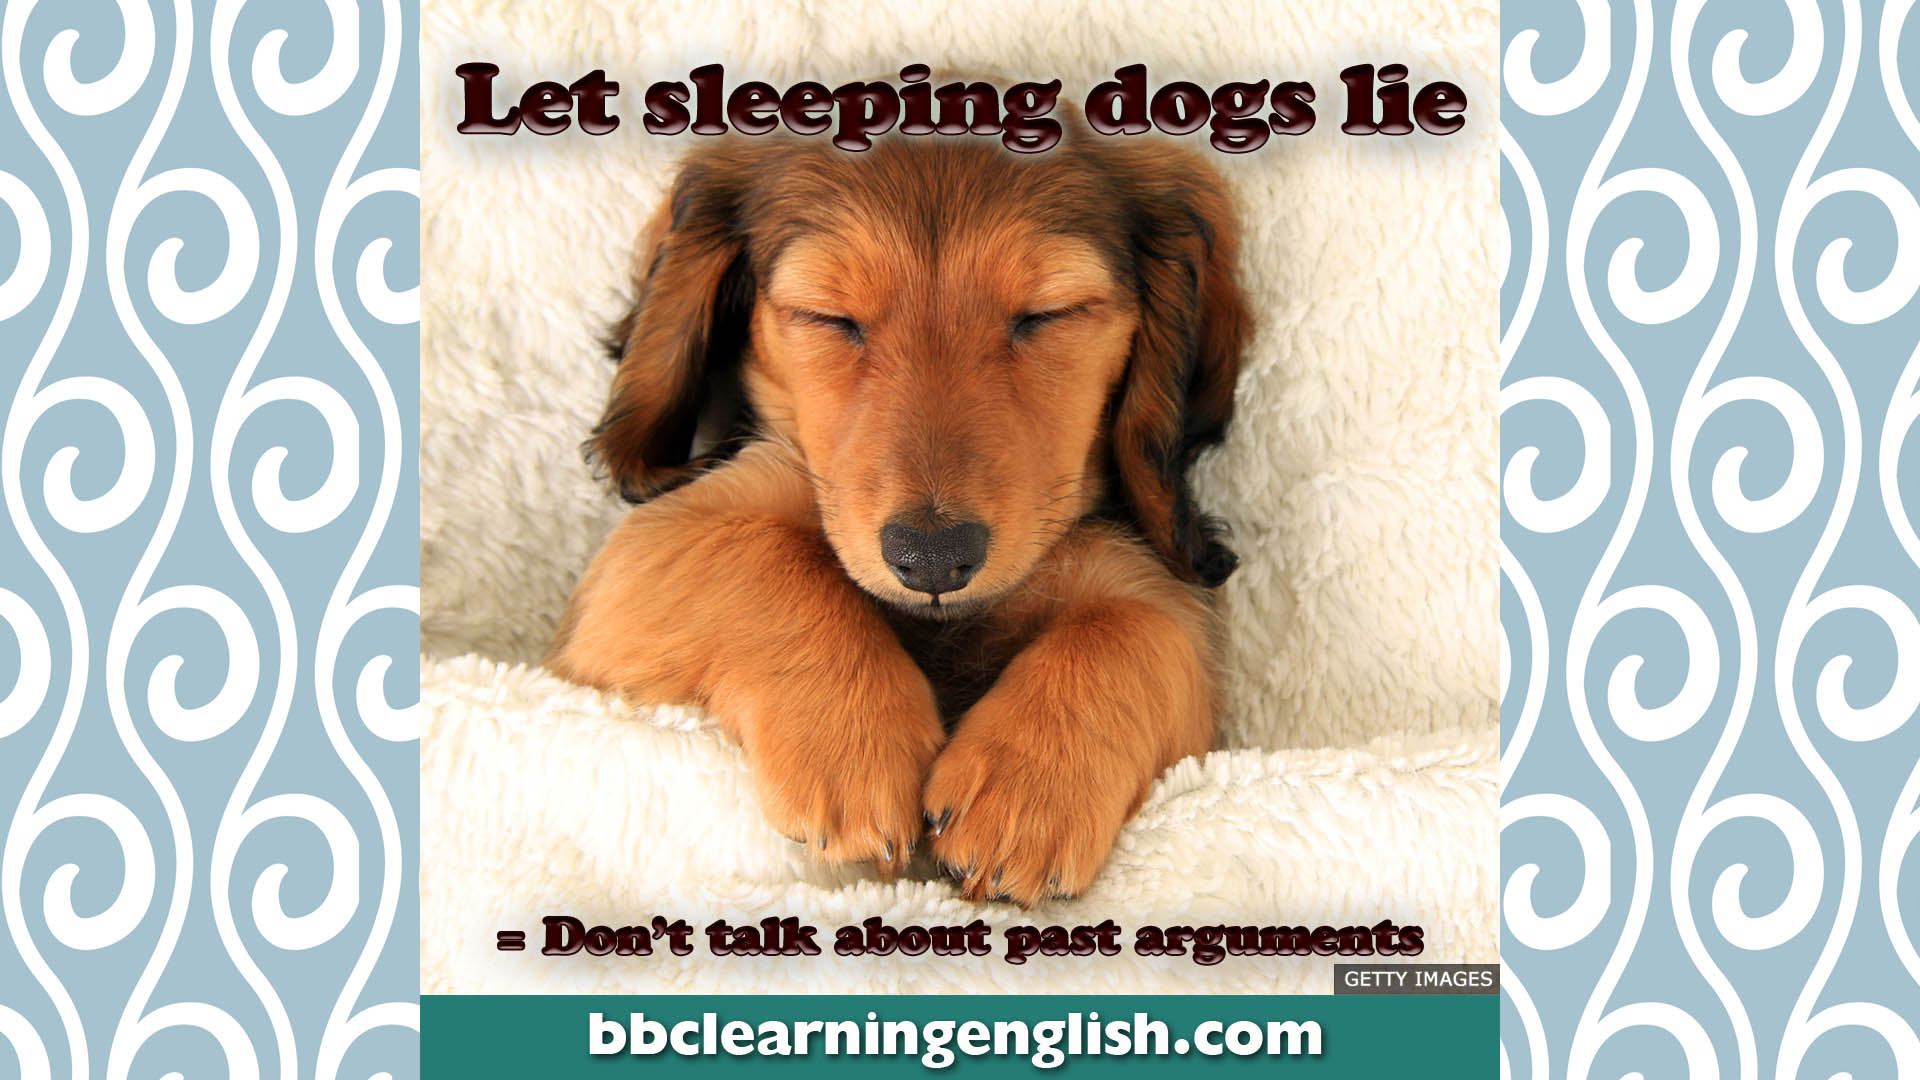 what does the phrase let sleeping dogs lie come from and what does it mean